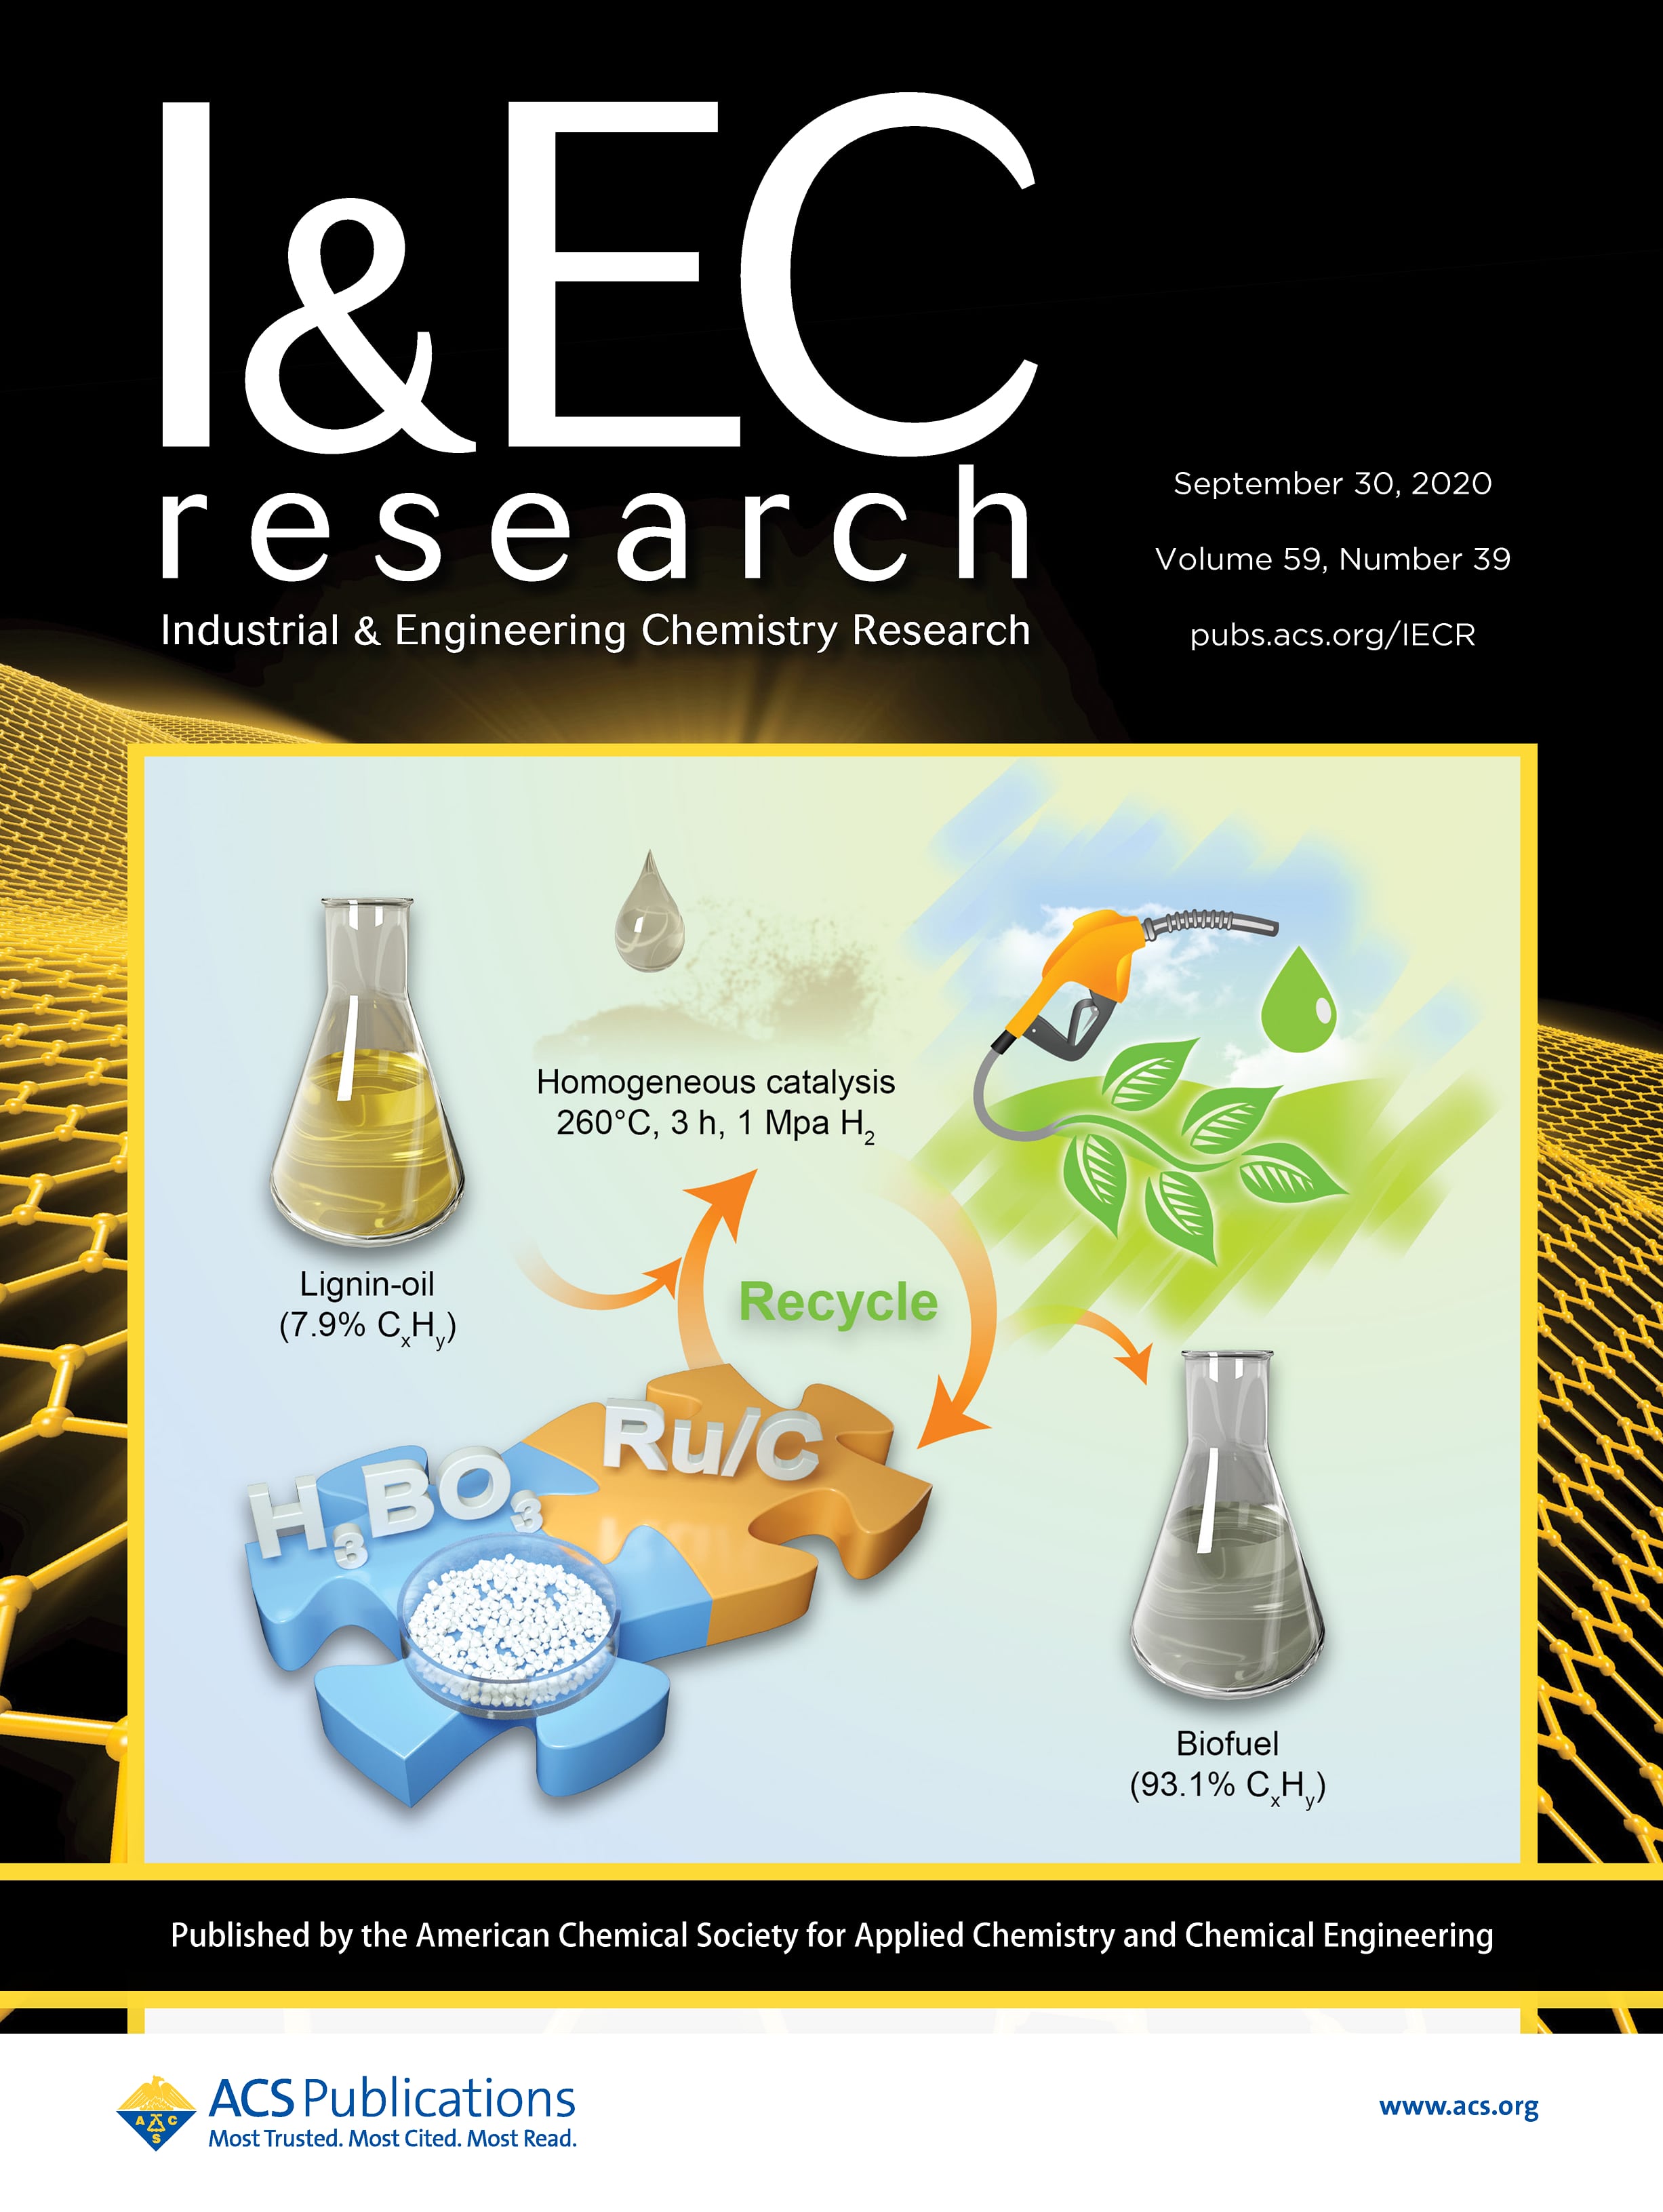 Boric Acid as a Novel Homogeneous Catalyst Coupled with Ru/C for Hydrodeoxygenation of Phenolic Compounds and Raw Lignin Oil